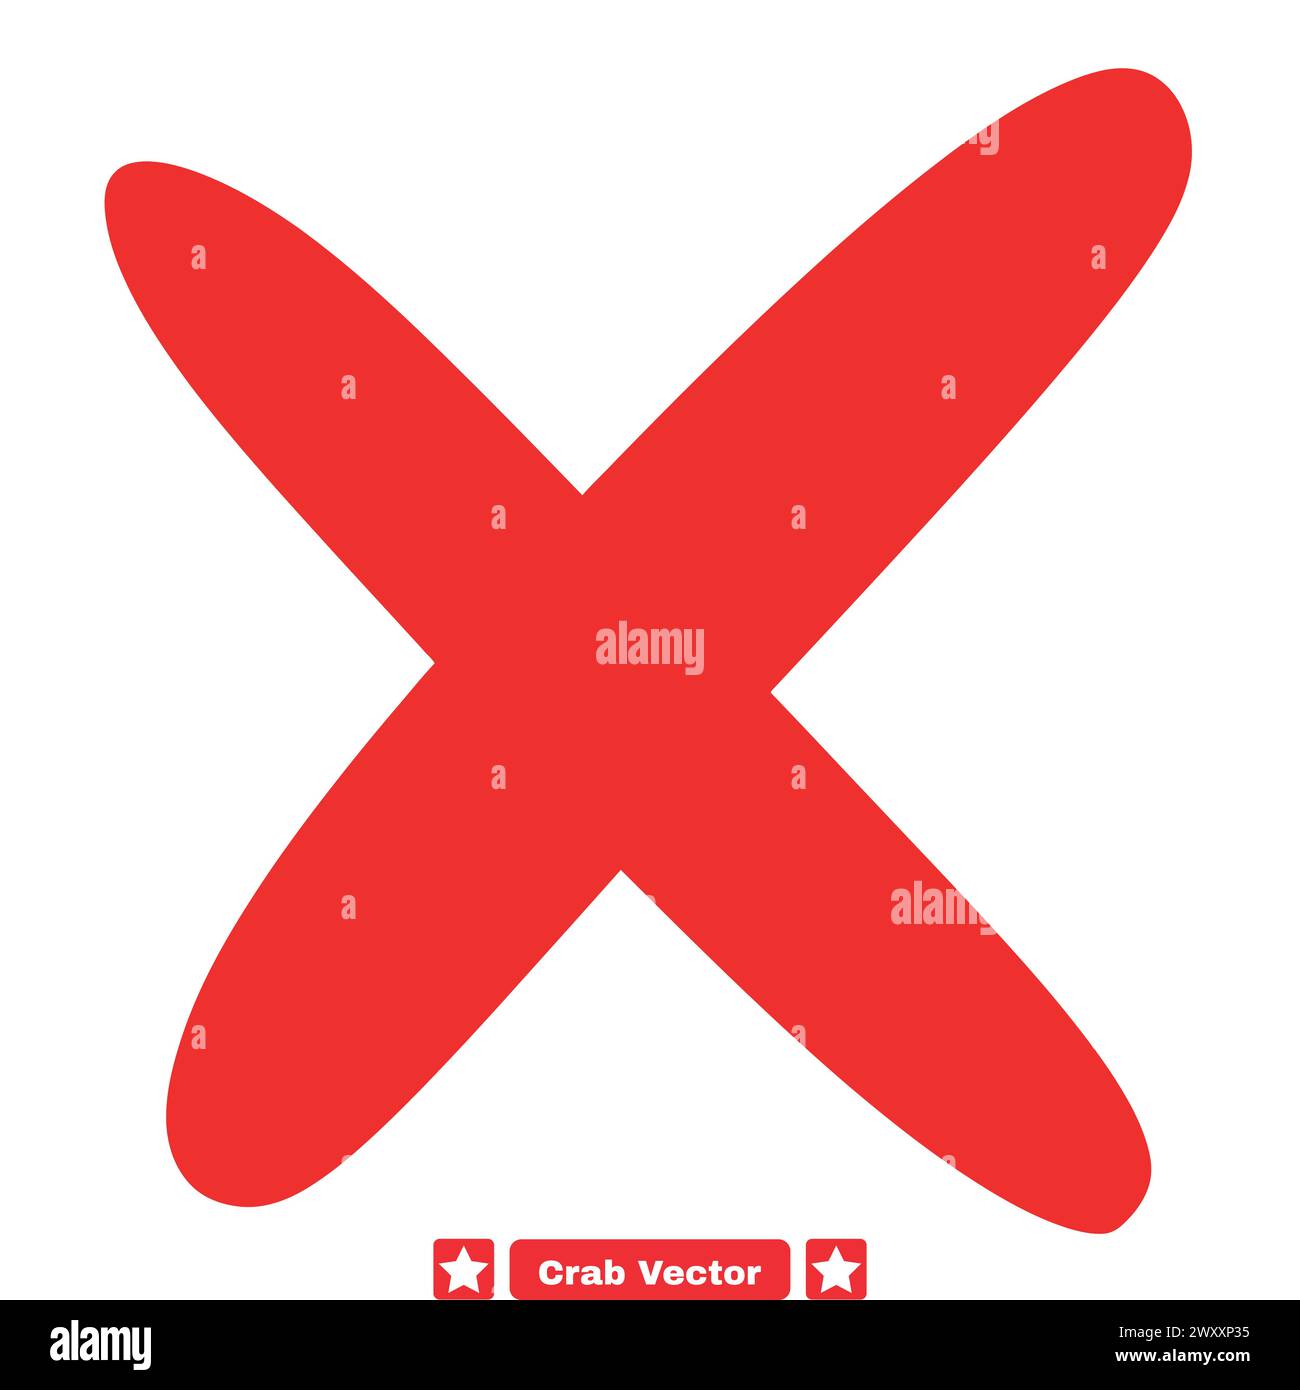 Fail Sign Vector Pack Cross Icons as Symbols of Errors, Failures, and Misjudgments in Design Stock Vector